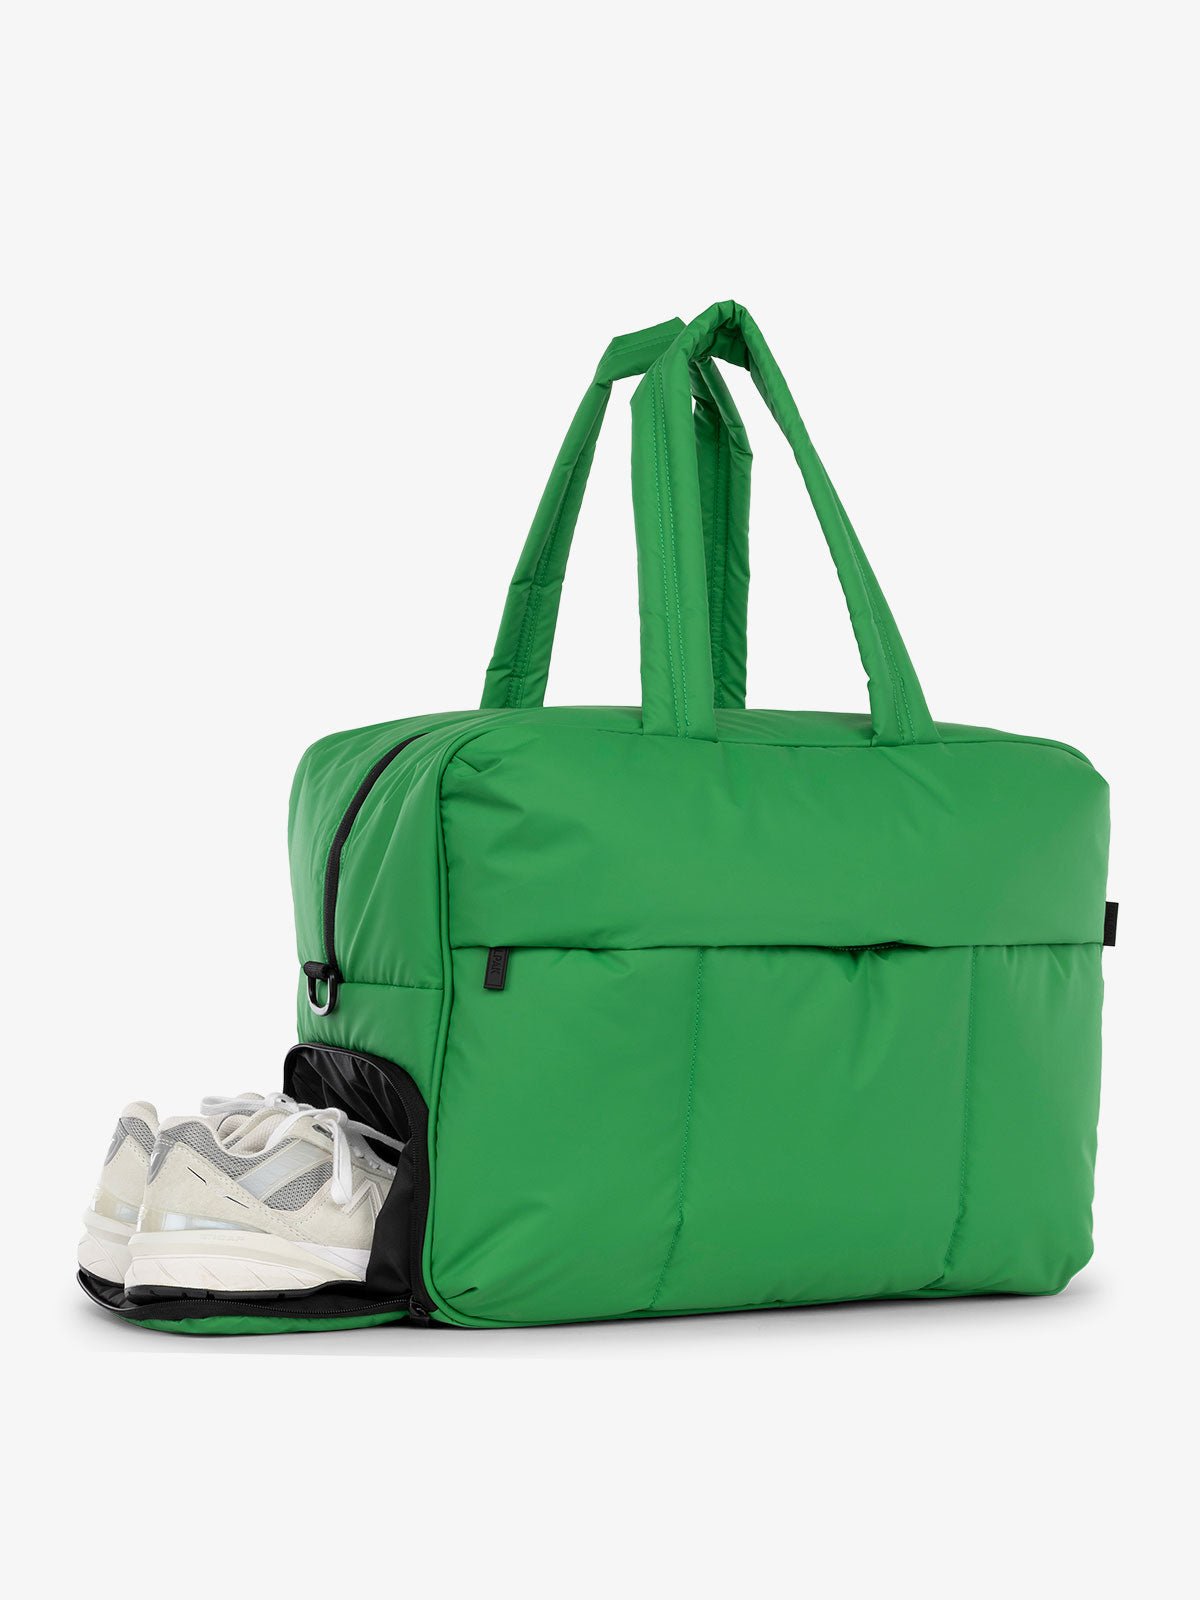 CALPAK Luka large duffel bag with side shoe compartment and dual handles in green apple